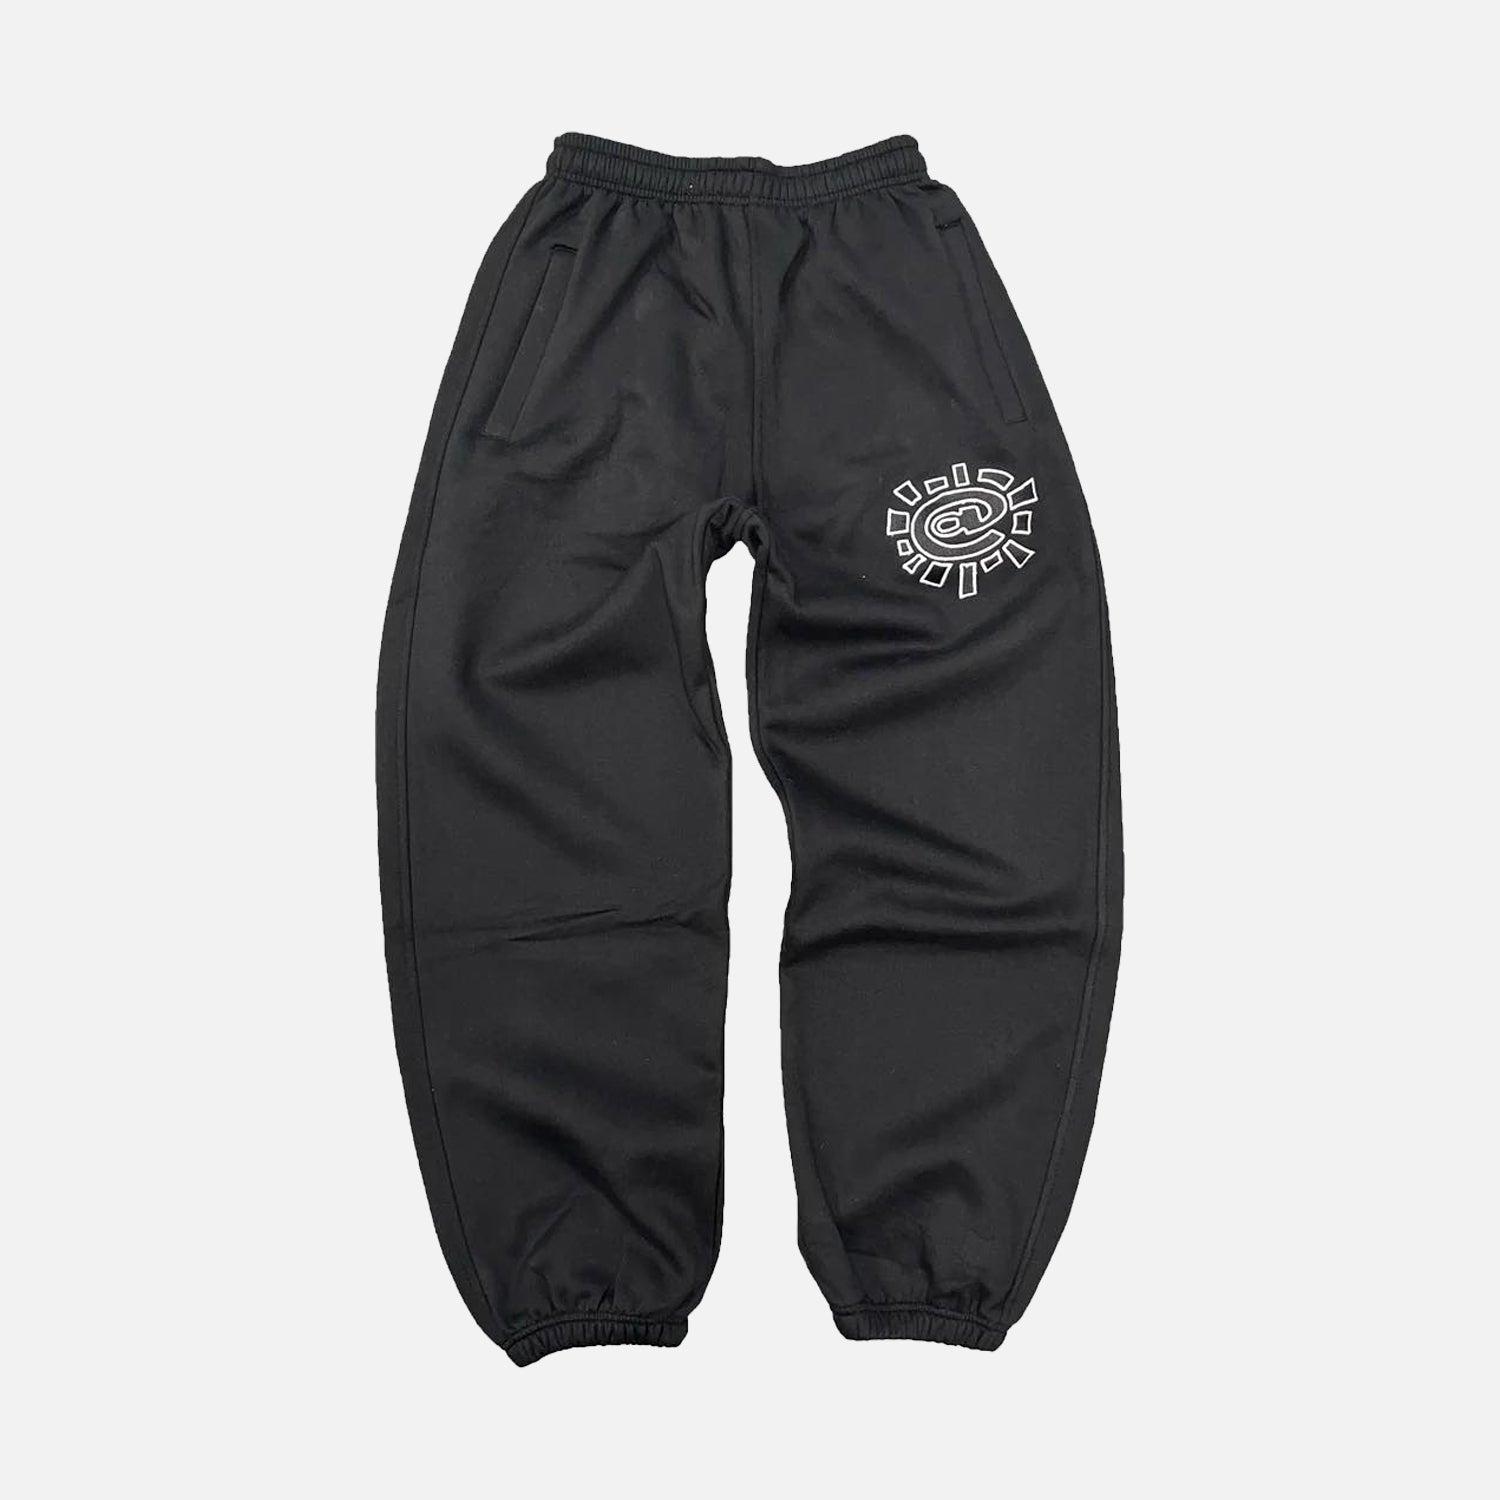 Always Do What You Should Do Sun Relaxed Embroidery Bottoms - Black